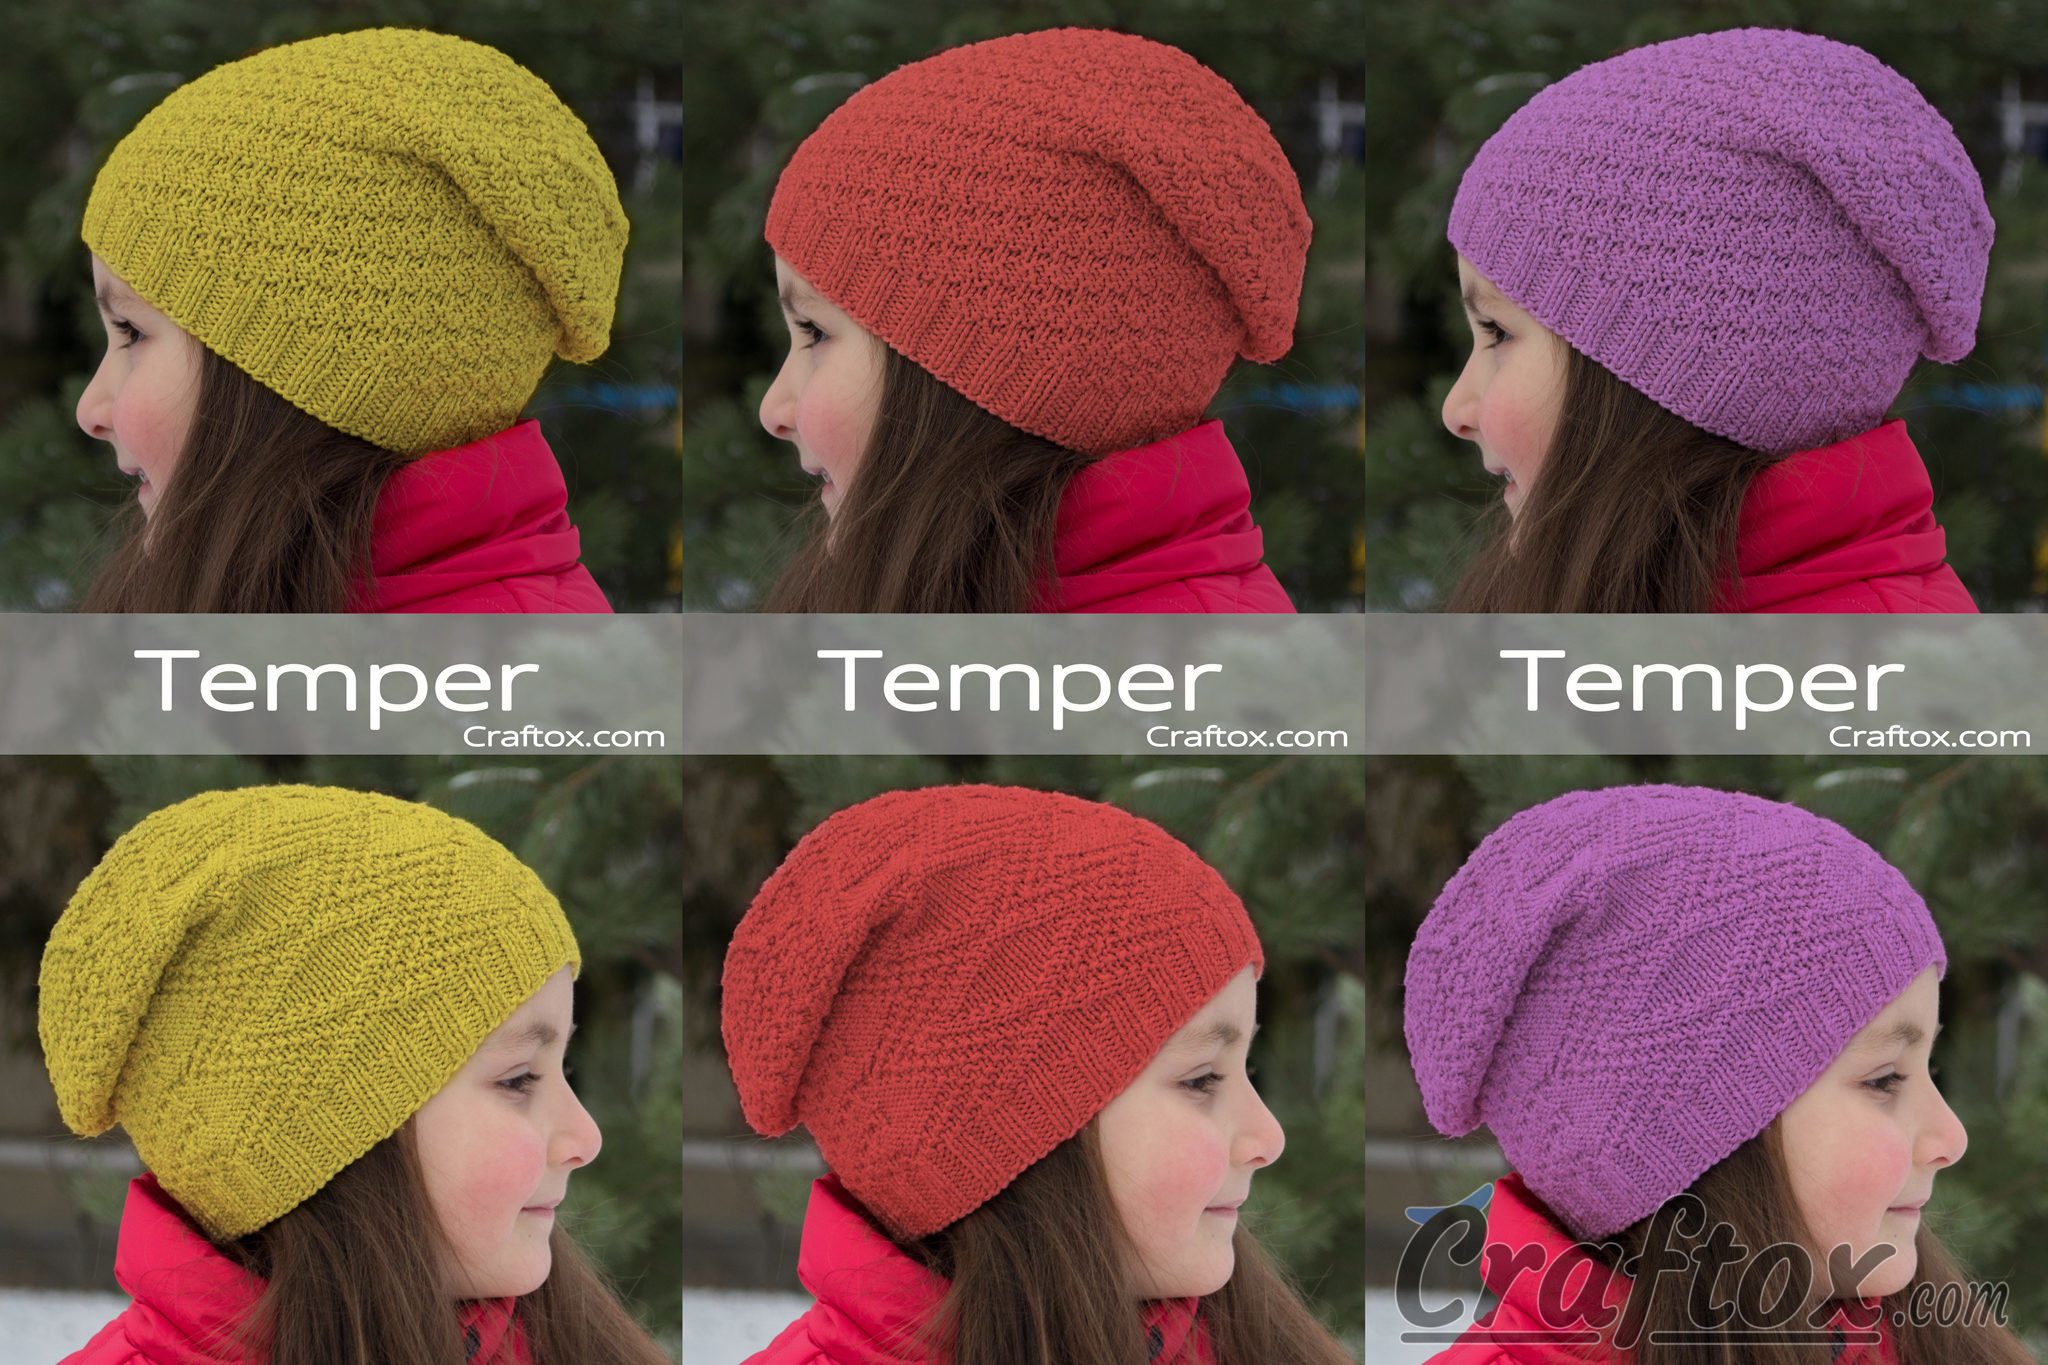 Free Knitting Patterns For Toques Childs Slouchy Beanie Hat Temper Free Knitting Pattern For